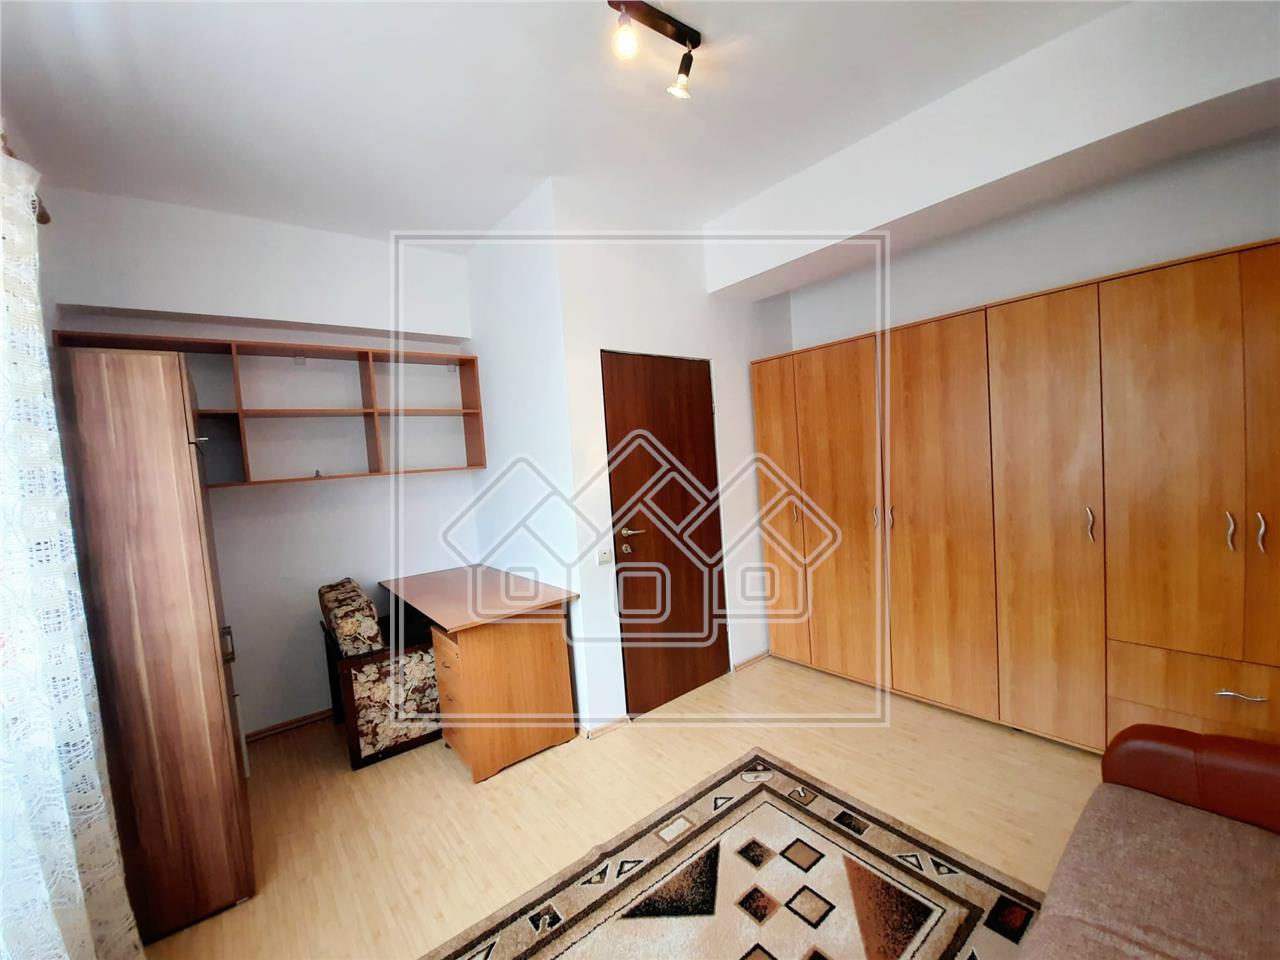 Apartment for rent in Sibiu - 3 rooms and balcony - Strand II area